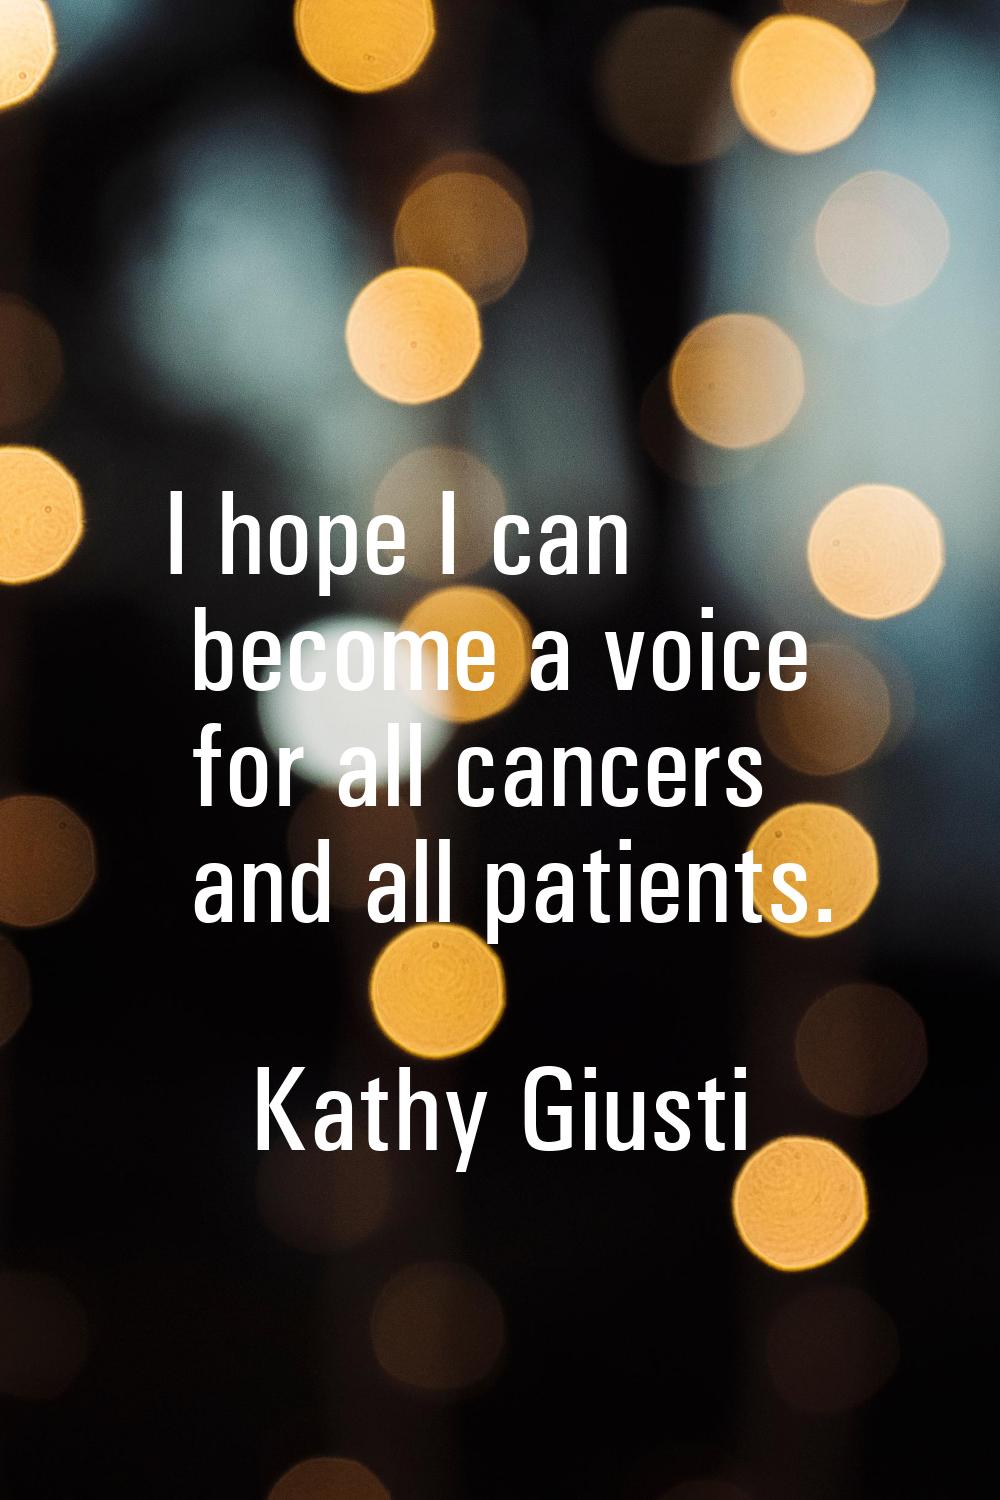 I hope I can become a voice for all cancers and all patients.